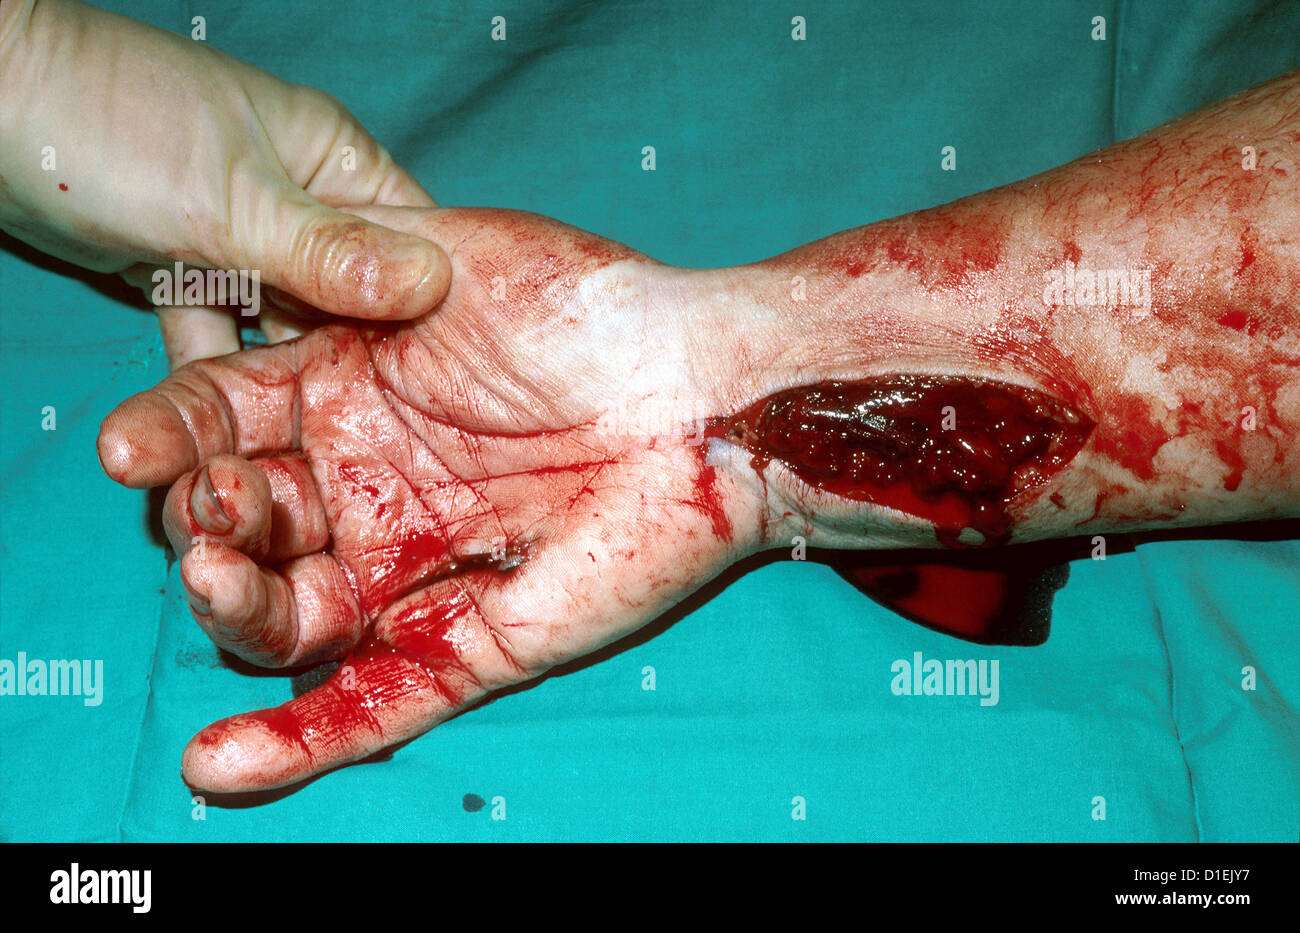 Lacerations of hand and arm.  Stock Photo